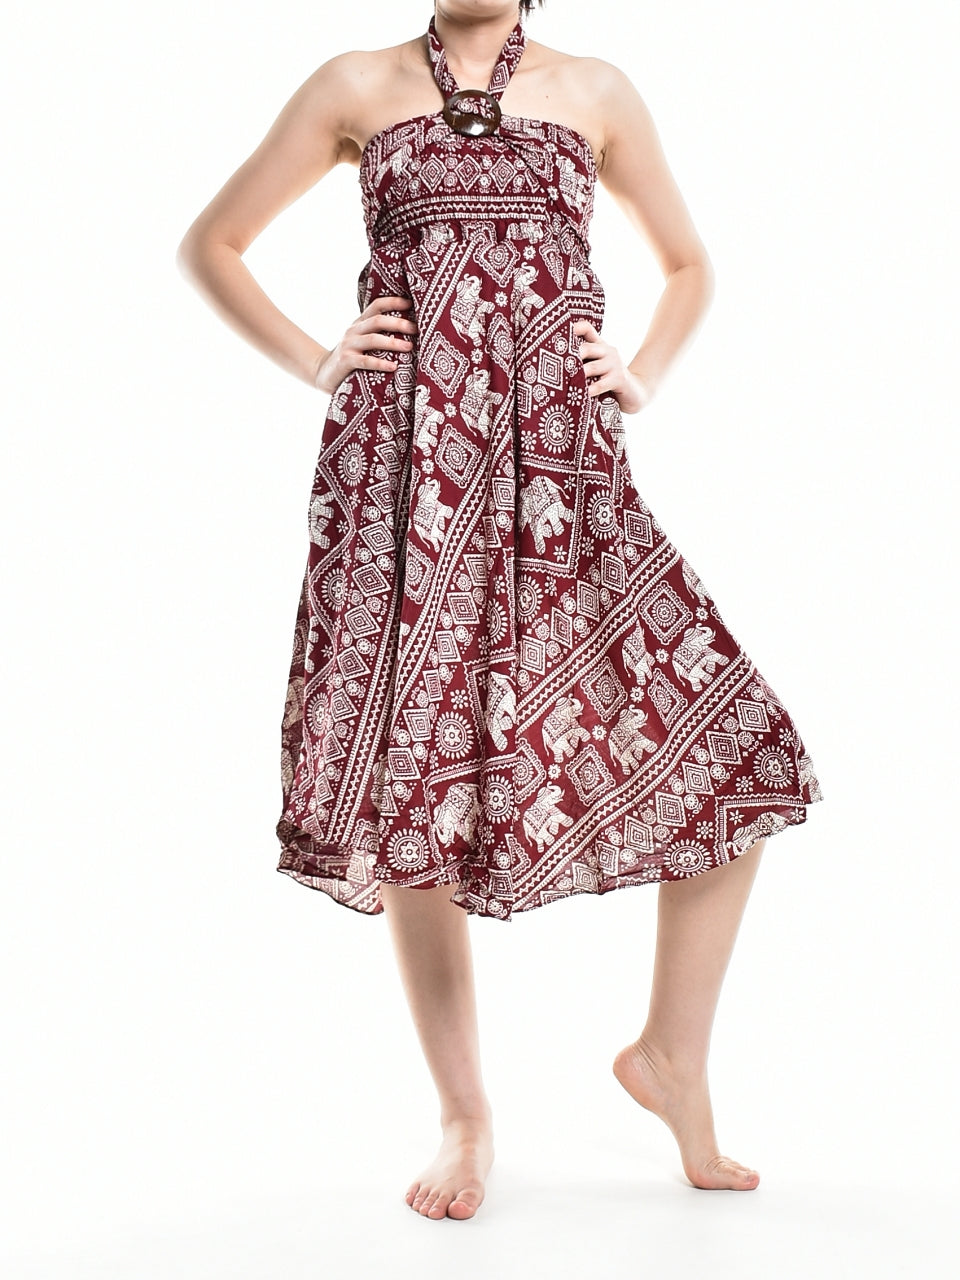 Bohotusk Red Elephant Print Long Skirt With Coconut Buckle (& Strapless Dress) S/M Only